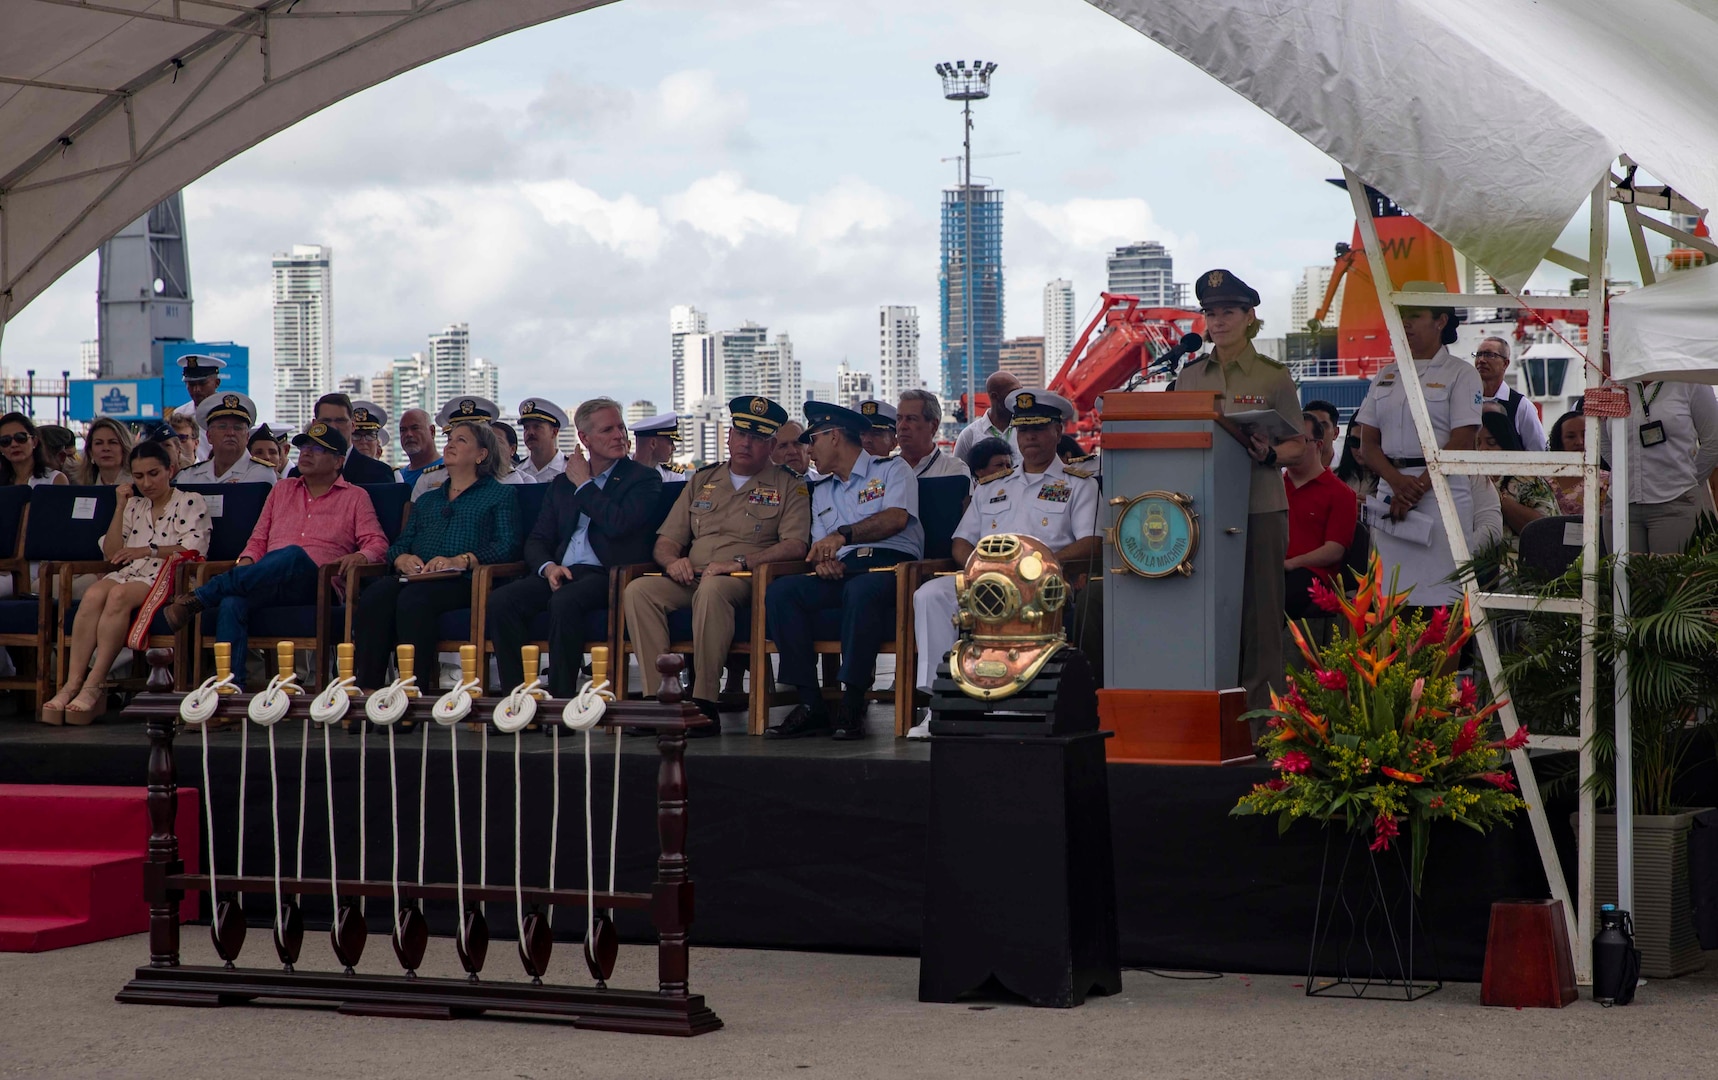 221118-N-VQ41-1133 CARTAGENA, Colombia (Nov. 18, 2022) Gen. Laura J. Richardson, commander of U.S. Southern Command, speaks to U.S. and Colombian service members and officials during a closing ceremony signaling the end of the Colombia portion of Continuing Promise 2022 on the pier next to hospital ship USNS Comfort (T-AH 20), Nov. 18, 2022. Comfort is deployed to U.S. 4th Fleet in support of Continuing Promise 2022, a humanitarian assistance and goodwill mission conducting direct medical care, expeditionary veterinary care, and subject matter expert exchanges with five partner nations in the Caribbean, Central and South America. (U.S. Navy photo by Mass Communication Specialist 2nd Class Ethan J. Soto)